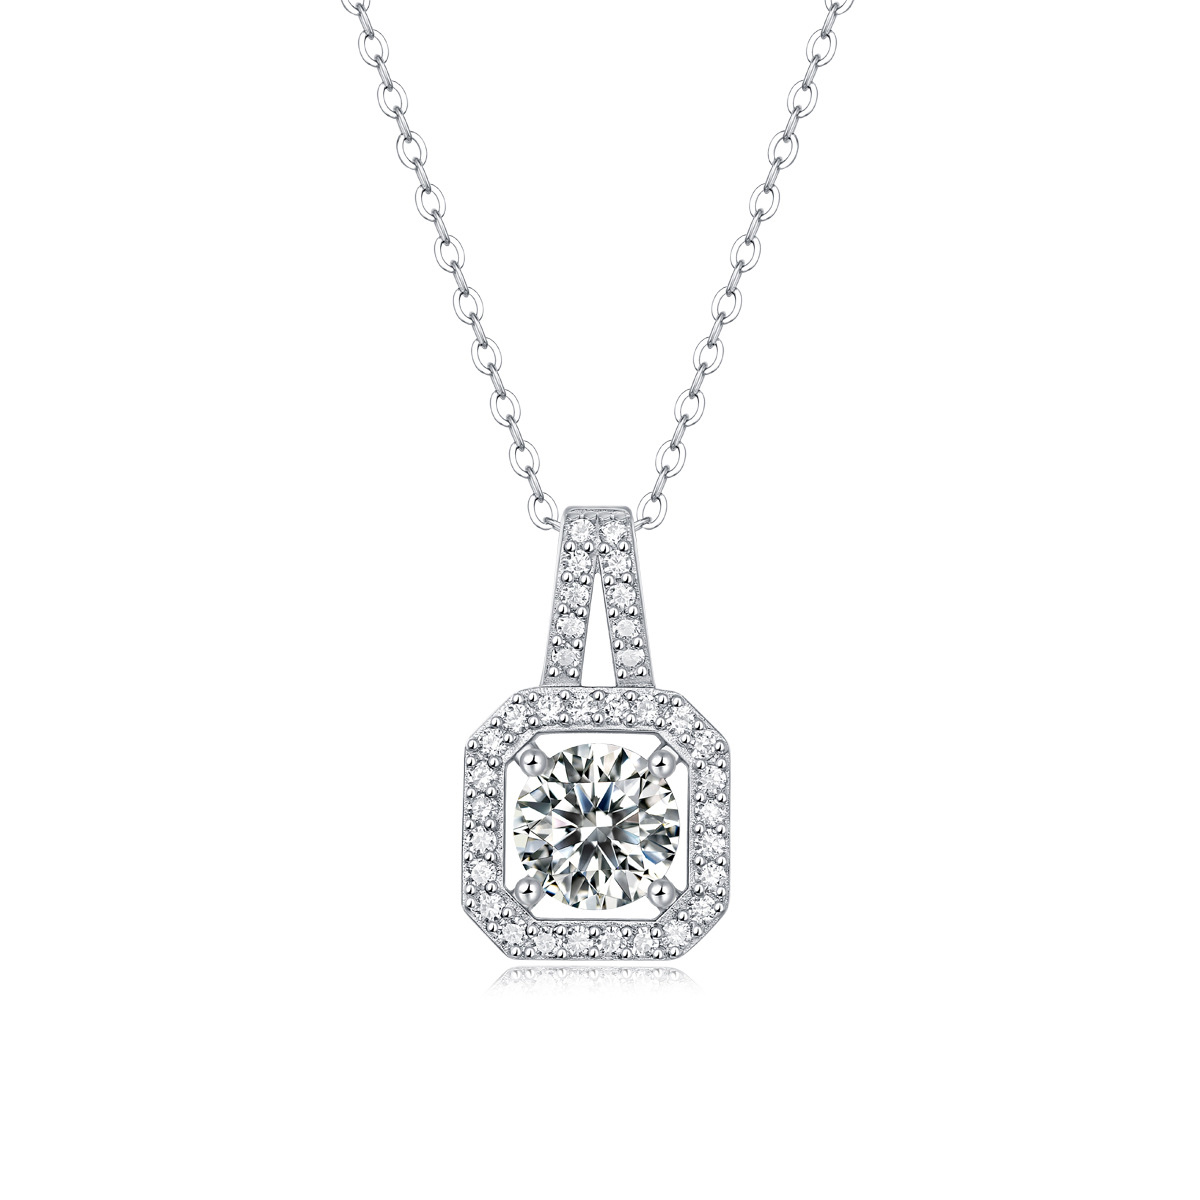 1Ct Squzre Moissanite Sterling Silver Necklace